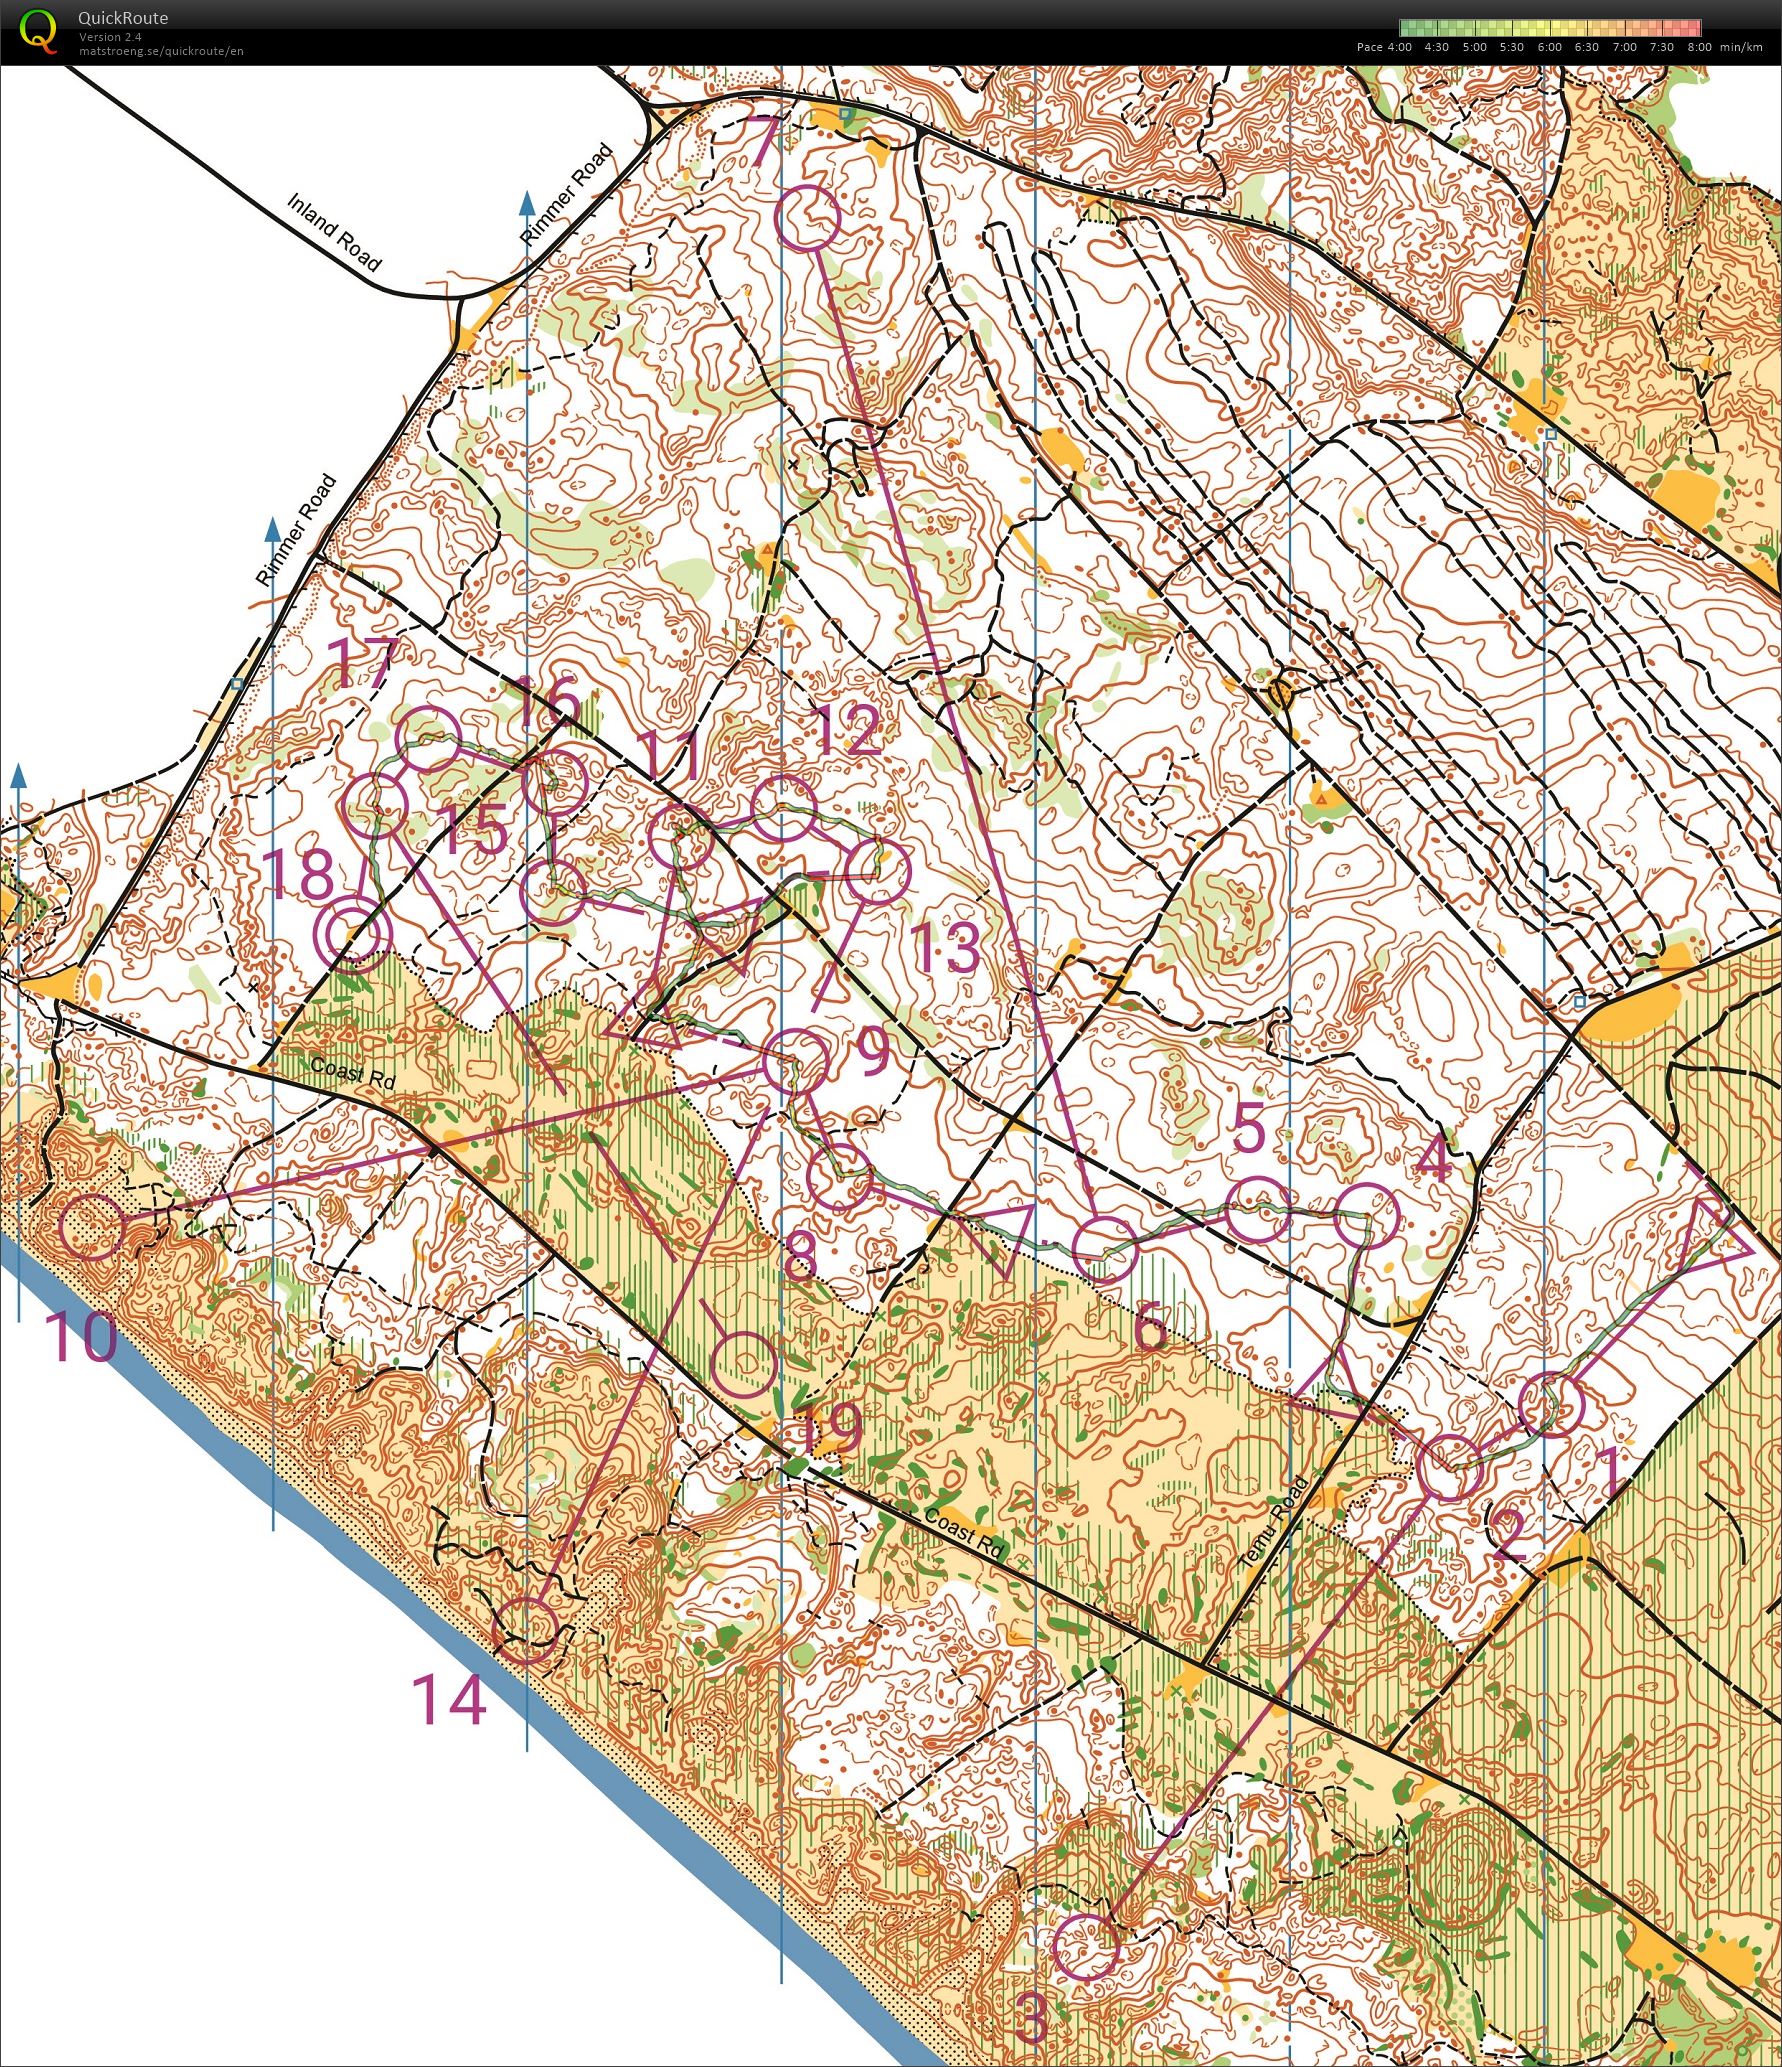 Race Start with Route Planning (2019-03-23)